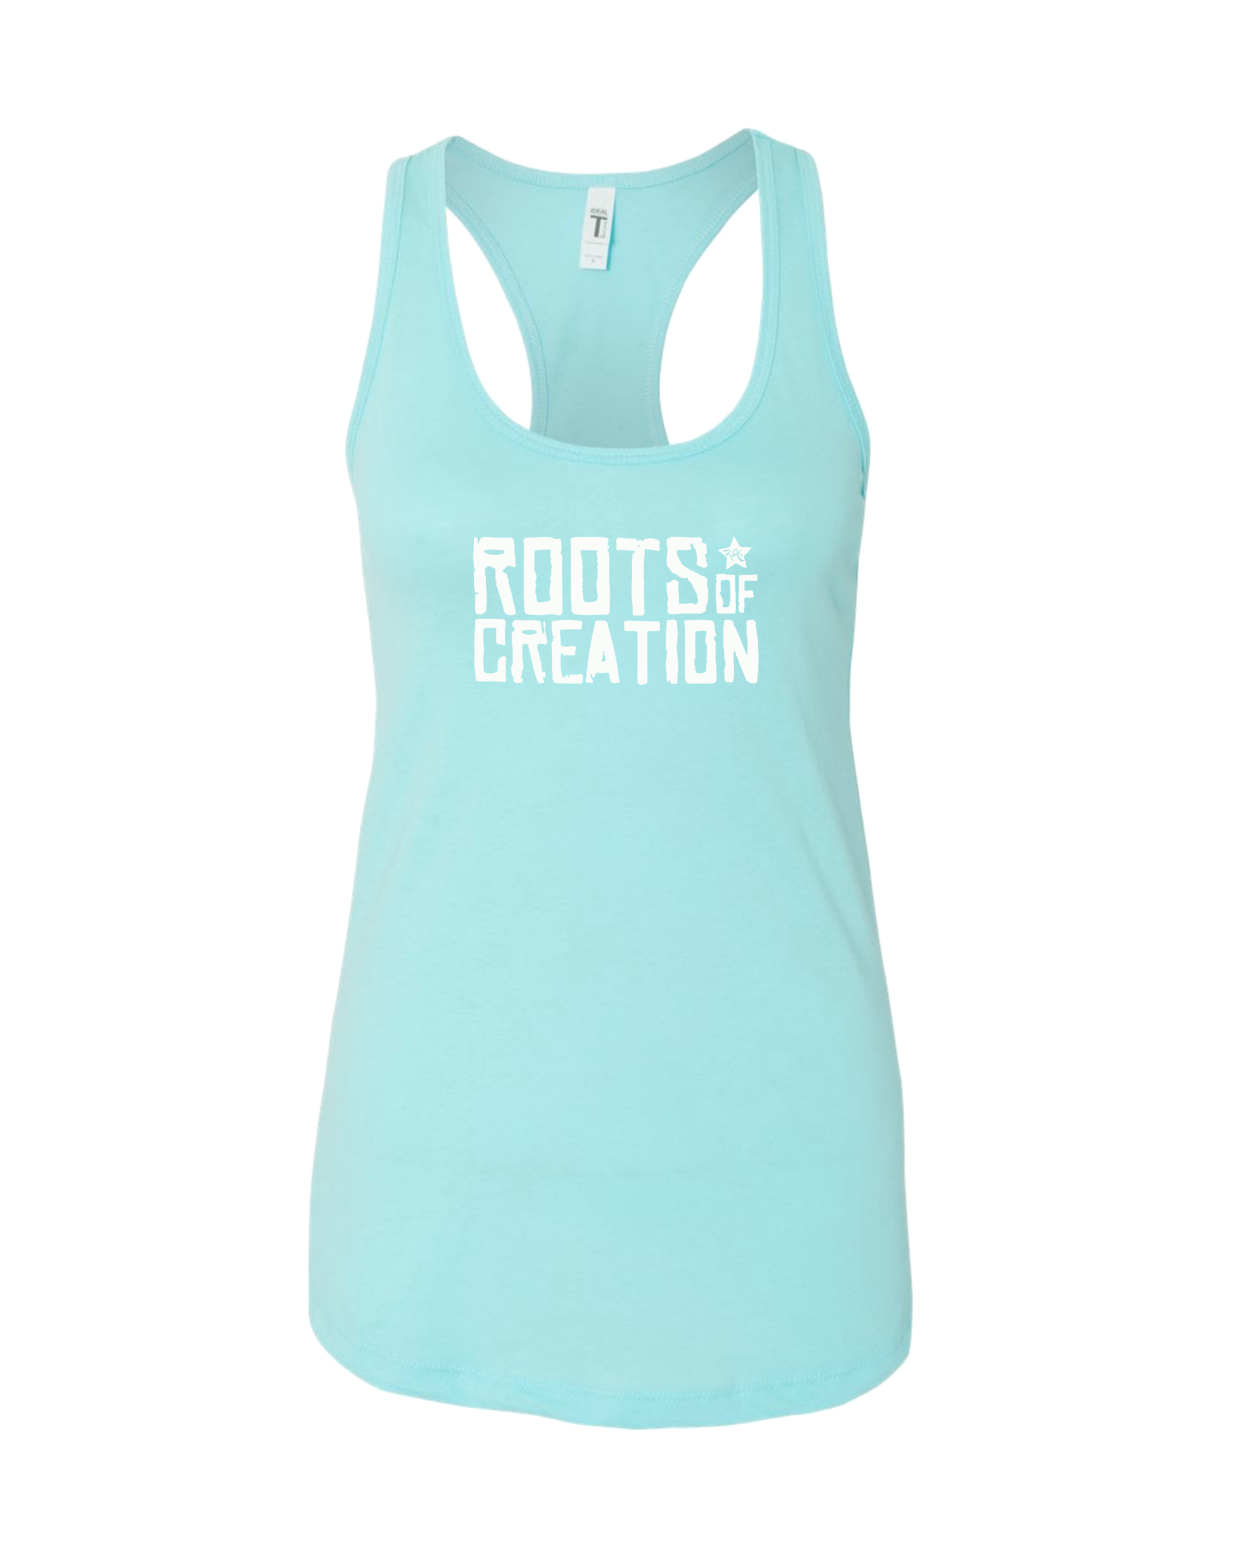 Roots of Creation - Womens Tank (Cancun)